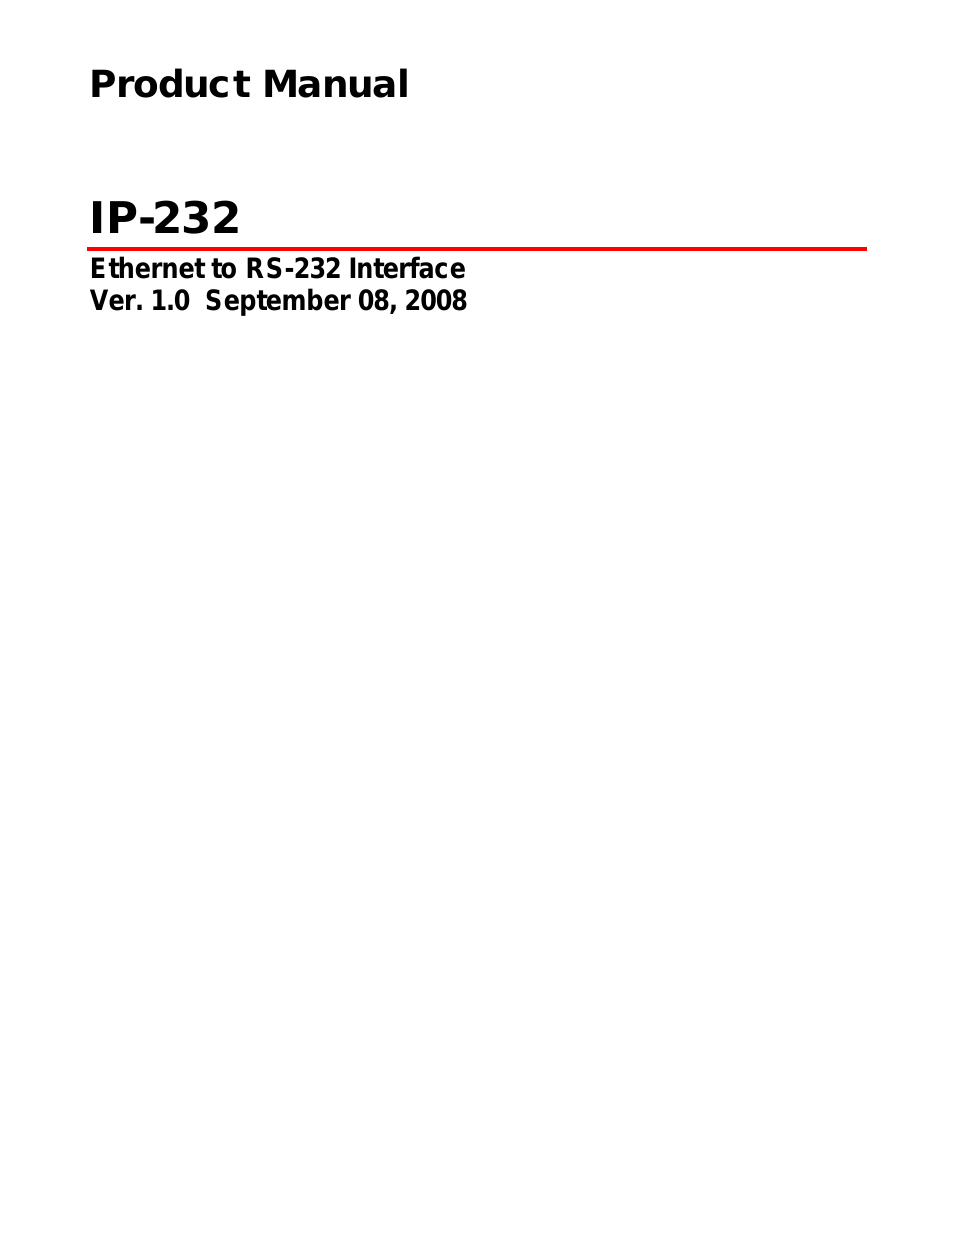 IP-232 Ethernet to RS-232 Interface